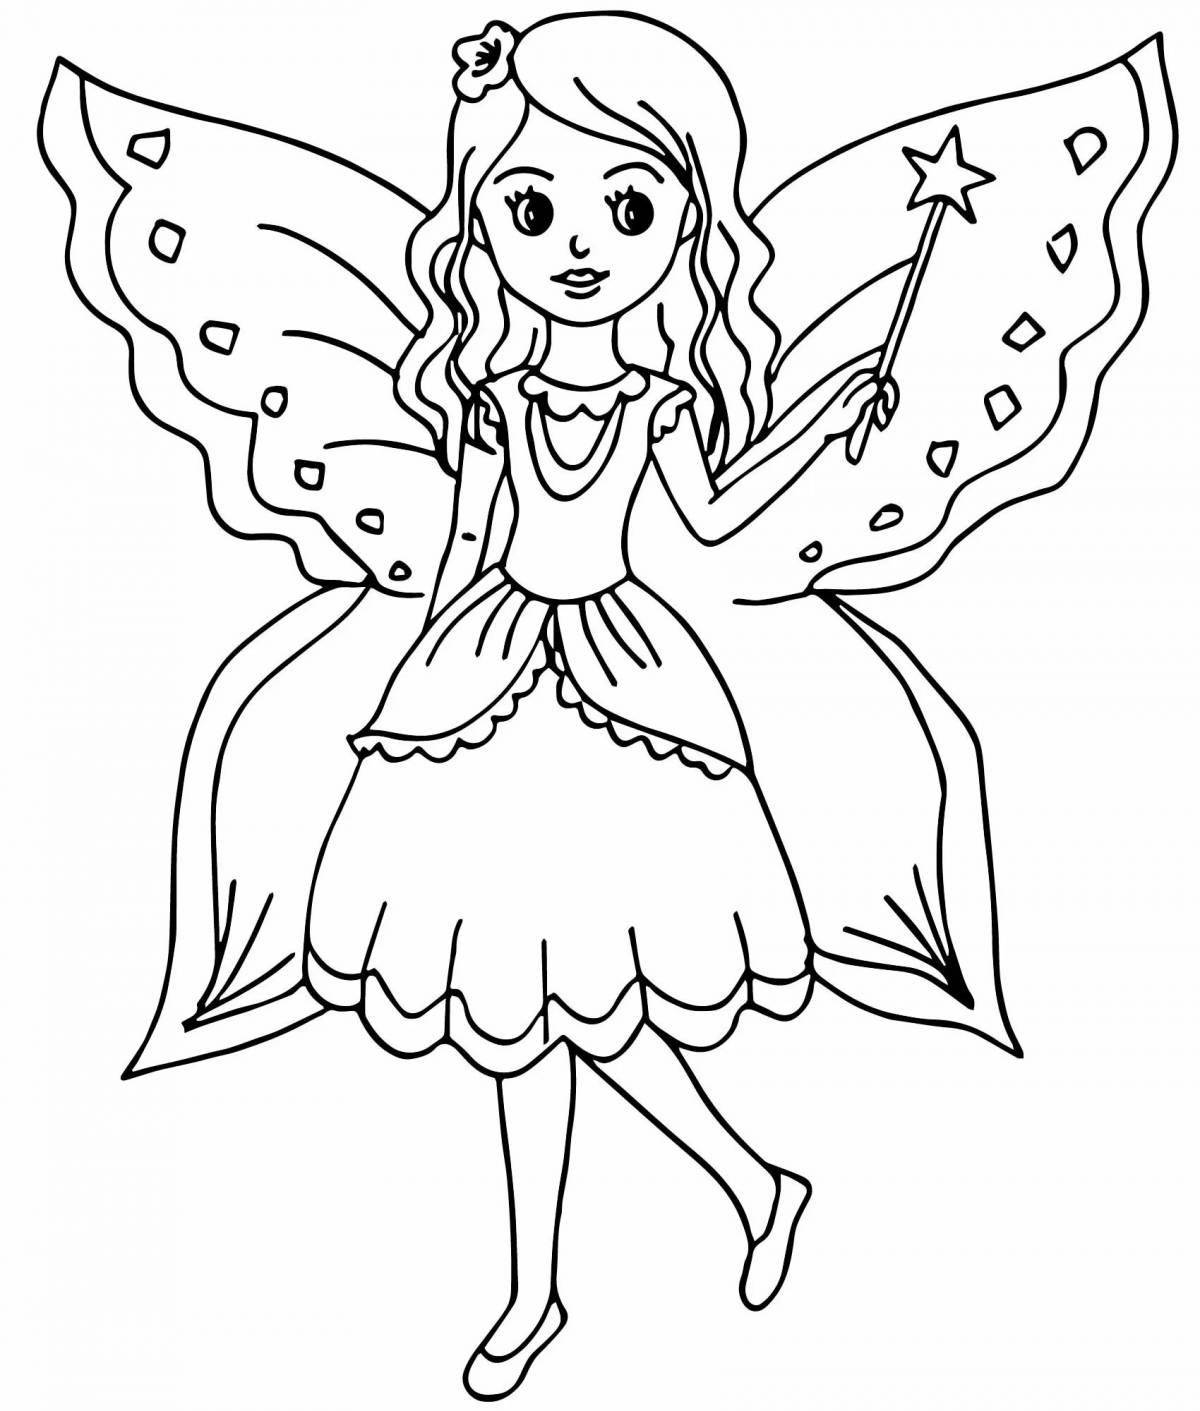 Fairy magic coloring book for kids 5-6 years old